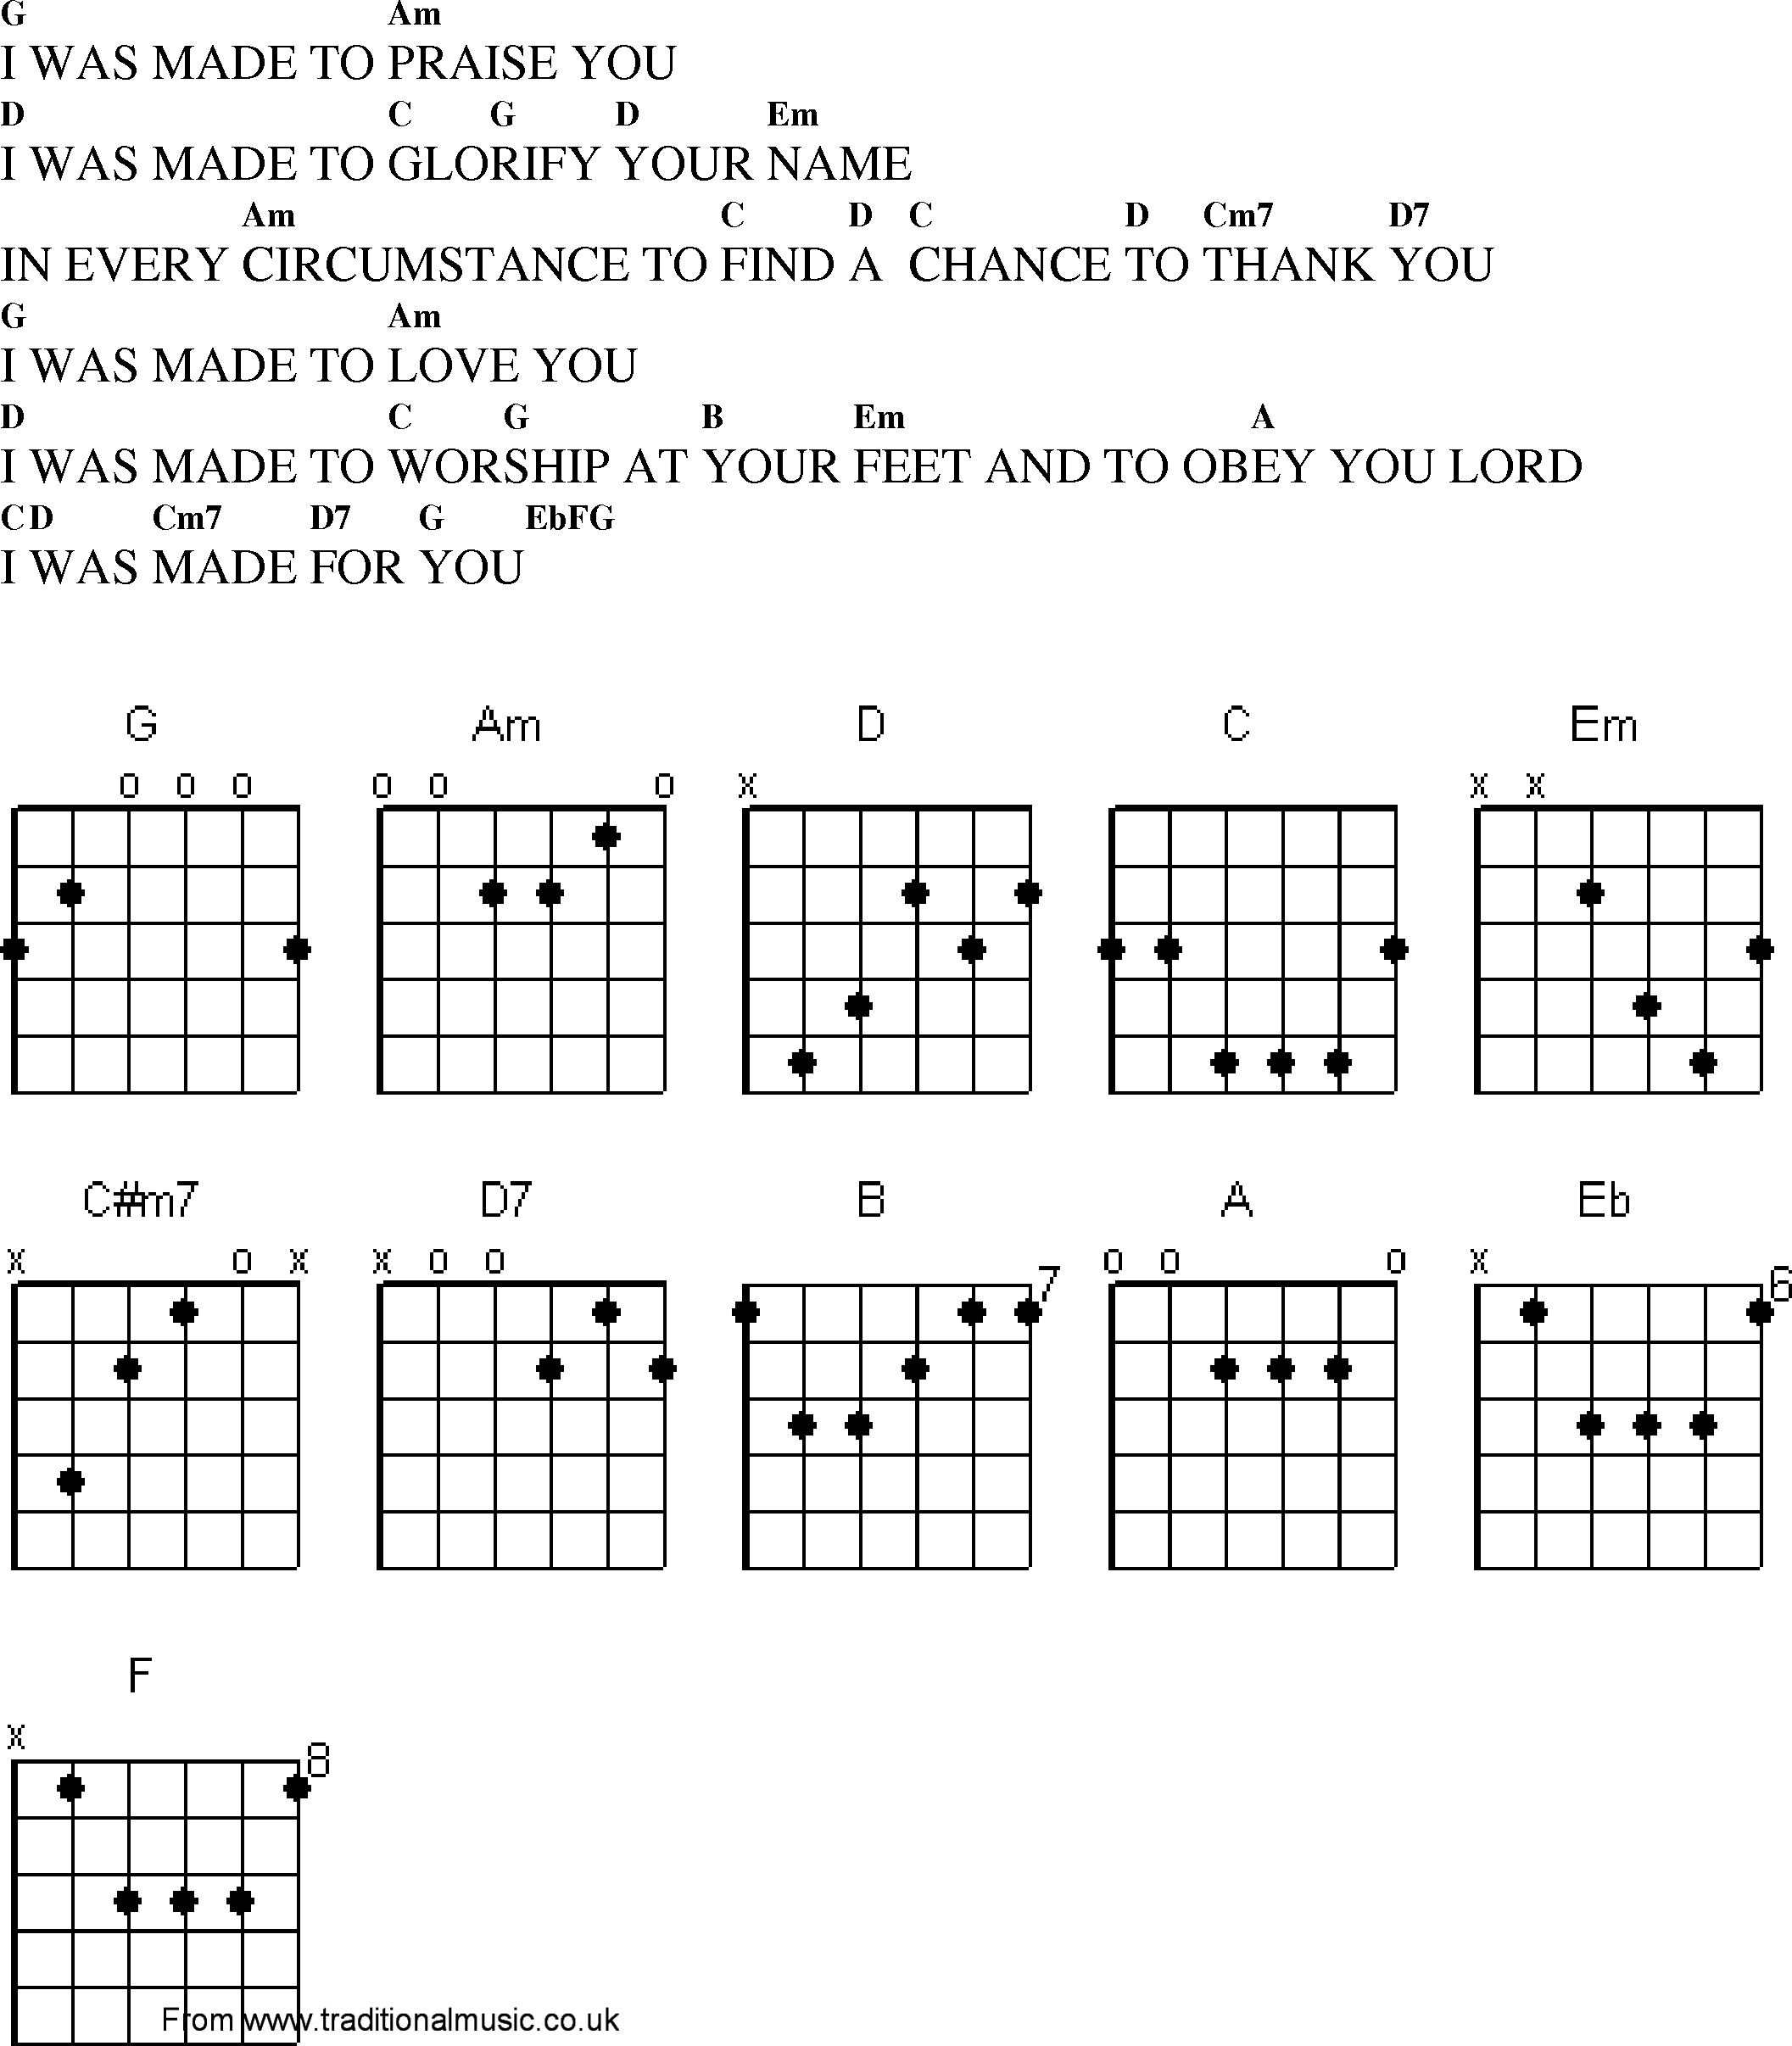 Gospel Song: i_ws_me_to_prise_you, lyrics and chords.